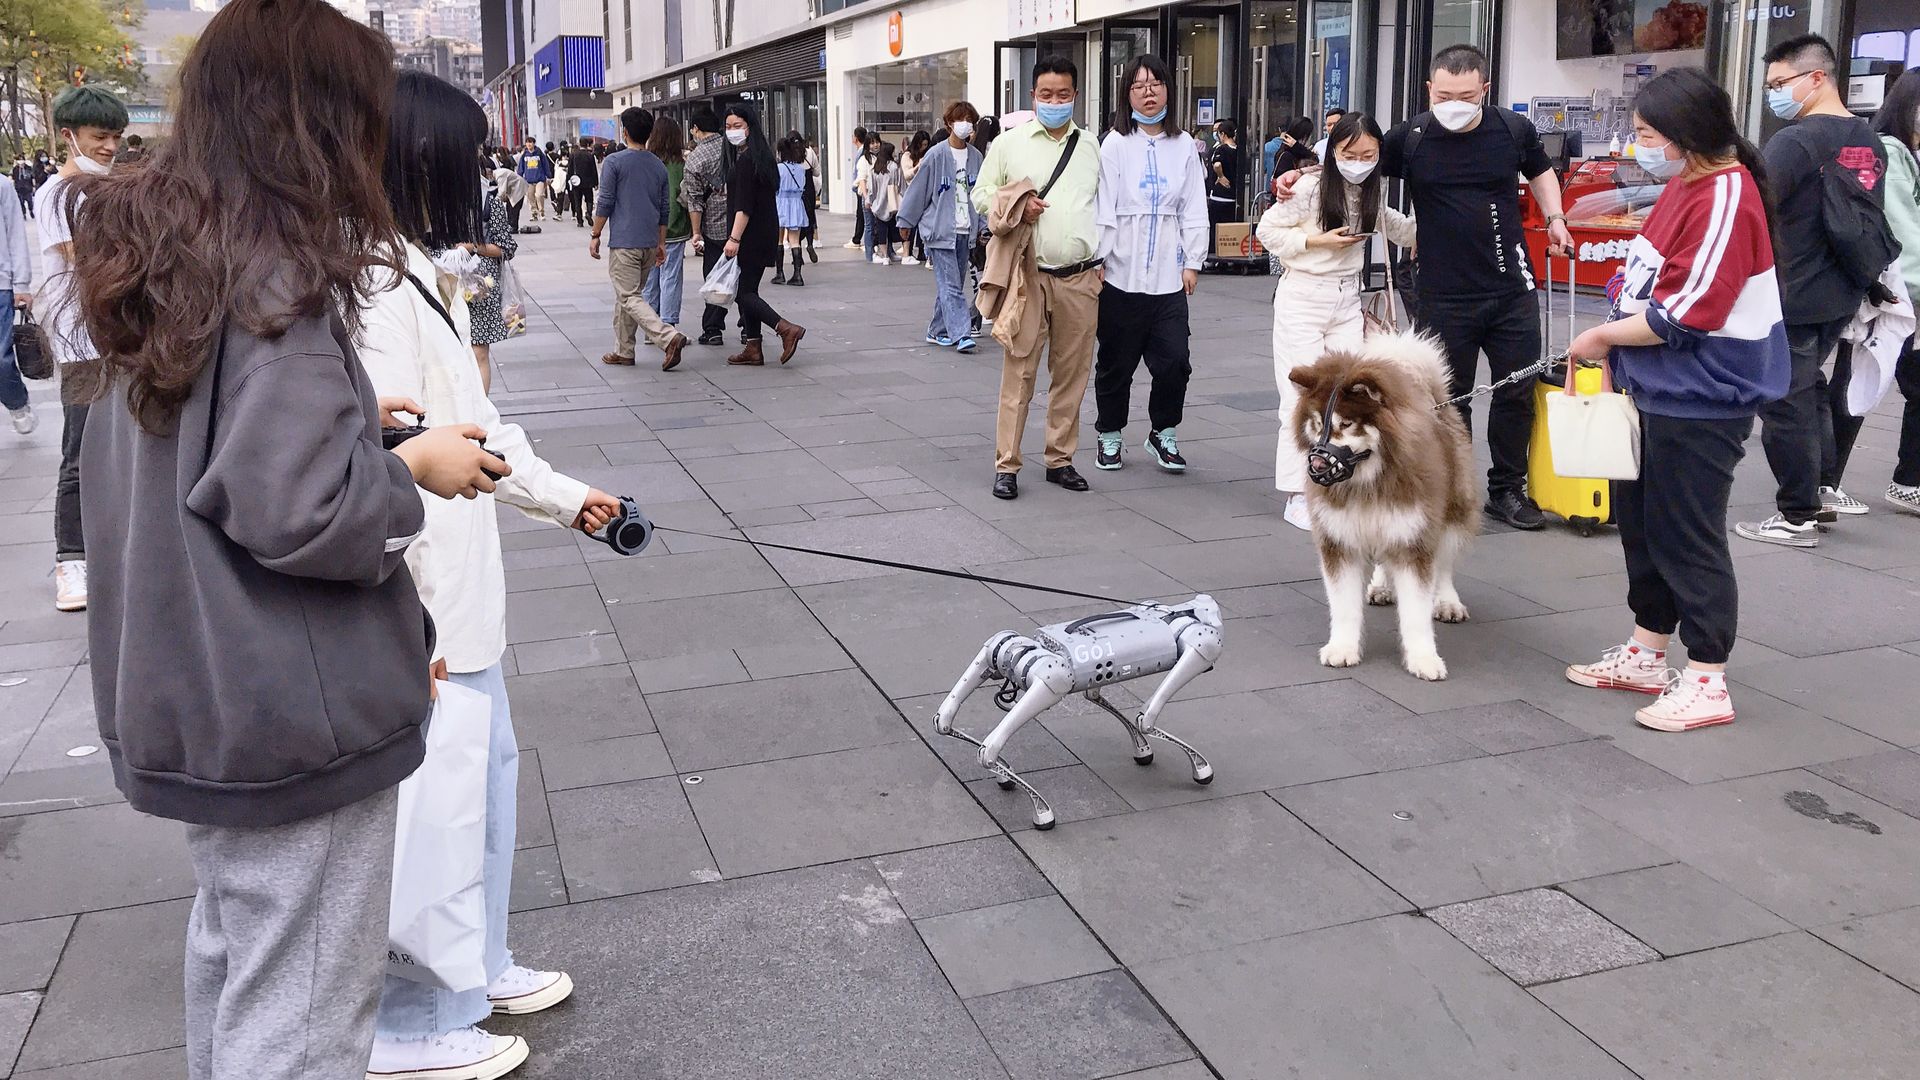 A robotic dog faces a real one on the sidewalk in Chengdu, China 